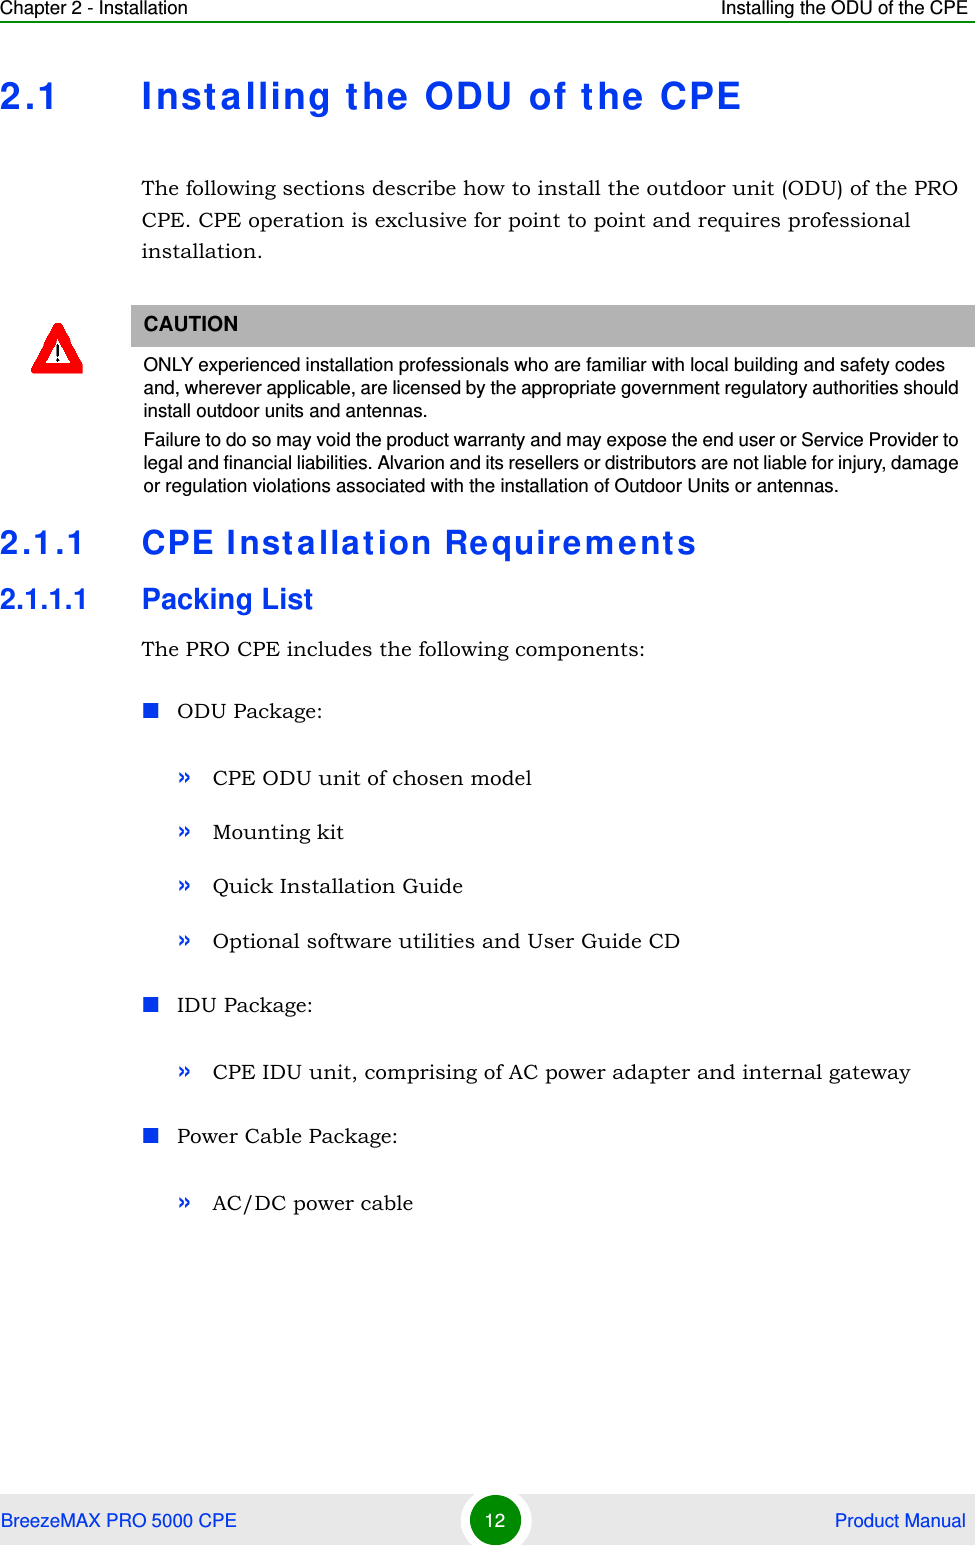 Chapter 2 - Installation Installing the ODU of the CPEBreezeMAX PRO 5000 CPE 12  Product Manual2.1 Installing the ODU of the  CPEThe following sections describe how to install the outdoor unit (ODU) of the PRO CPE. CPE operation is exclusive for point to point and requires professional installation.2.1.1 CPE Insta llation Re quire ment s2.1.1.1 Packing ListThe PRO CPE includes the following components:ODU Package:»CPE ODU unit of chosen model»Mounting kit»Quick Installation Guide»Optional software utilities and User Guide CDIDU Package:»CPE IDU unit, comprising of AC power adapter and internal gatewayPower Cable Package:»AC/DC power cableCAUTIONONLY experienced installation professionals who are familiar with local building and safety codes and, wherever applicable, are licensed by the appropriate government regulatory authorities should install outdoor units and antennas.Failure to do so may void the product warranty and may expose the end user or Service Provider to legal and financial liabilities. Alvarion and its resellers or distributors are not liable for injury, damage or regulation violations associated with the installation of Outdoor Units or antennas.